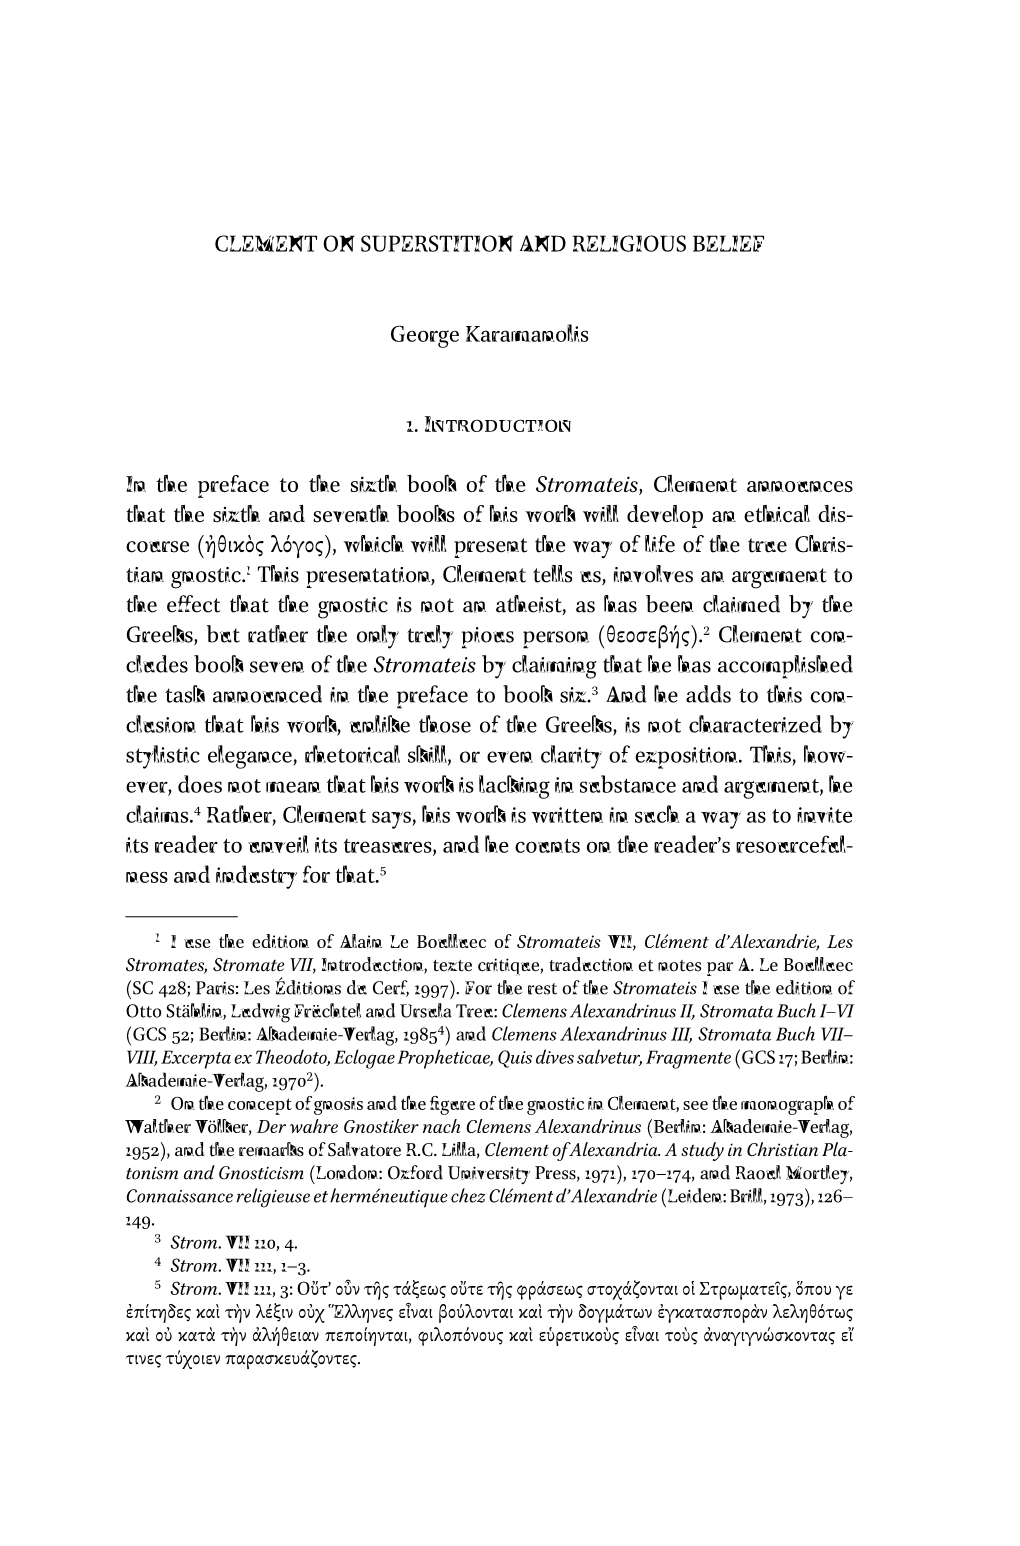 CLEMENT on SUPERSTITION and RELIGIOUS BELIEF George